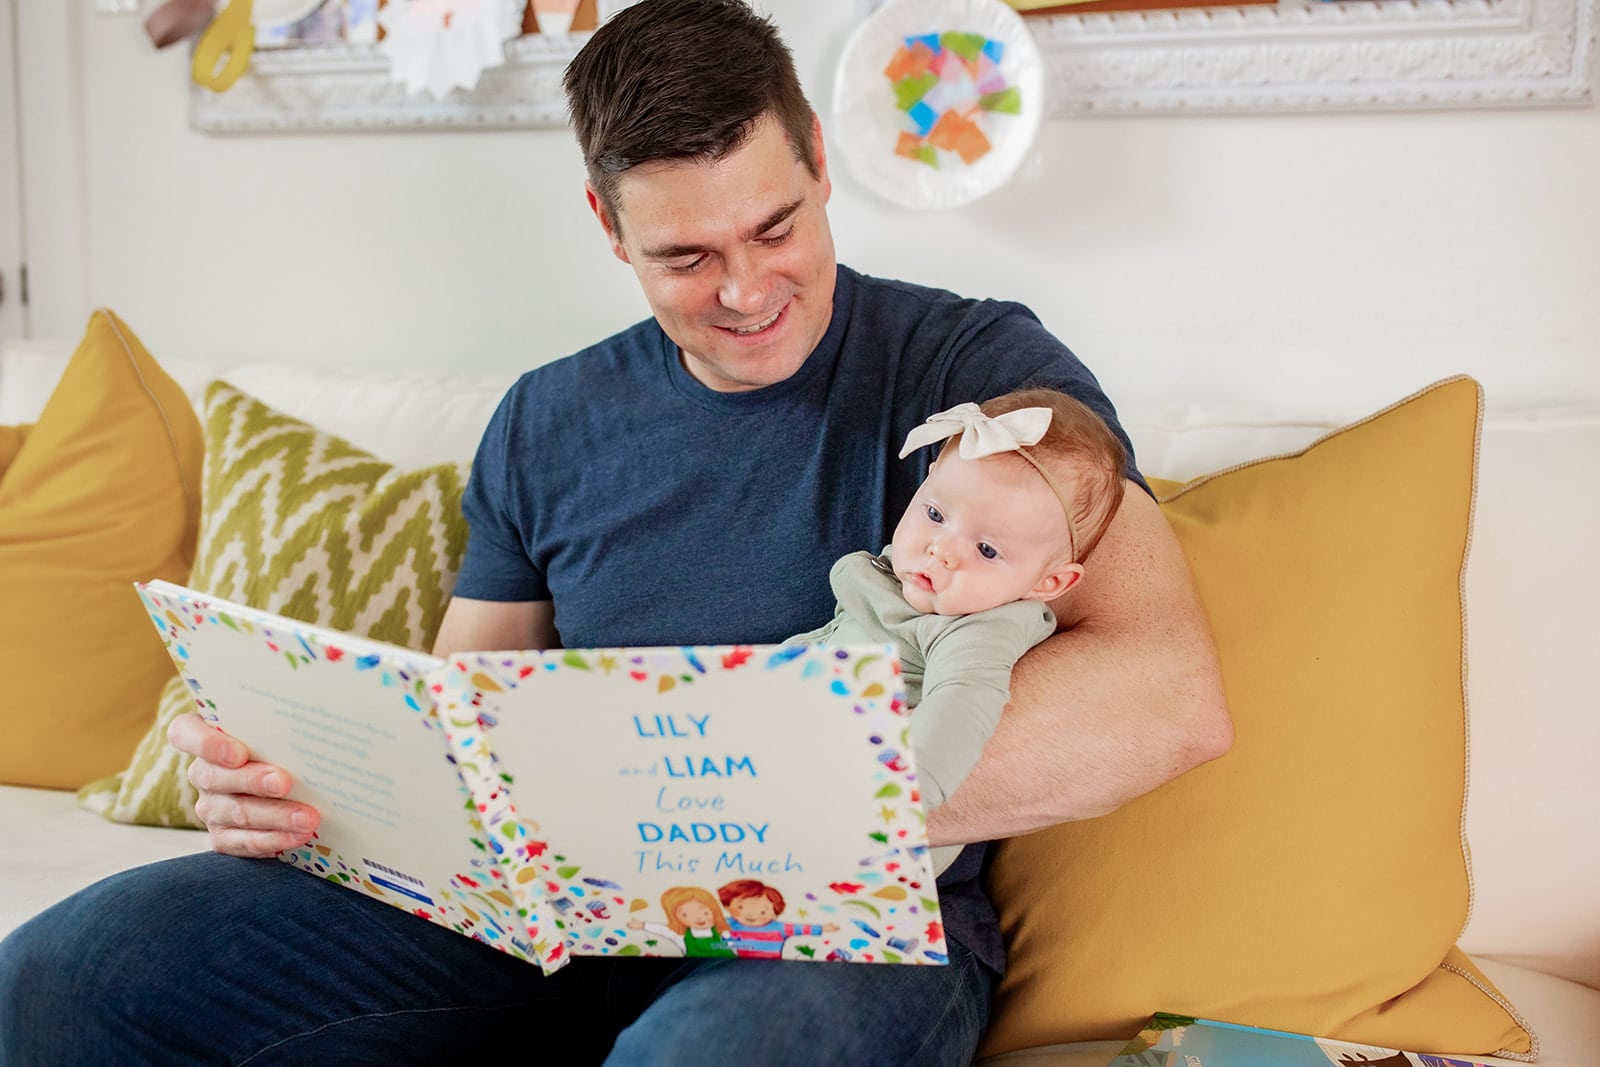 Father holding his baby girl while look at a Wonderbly personalized book